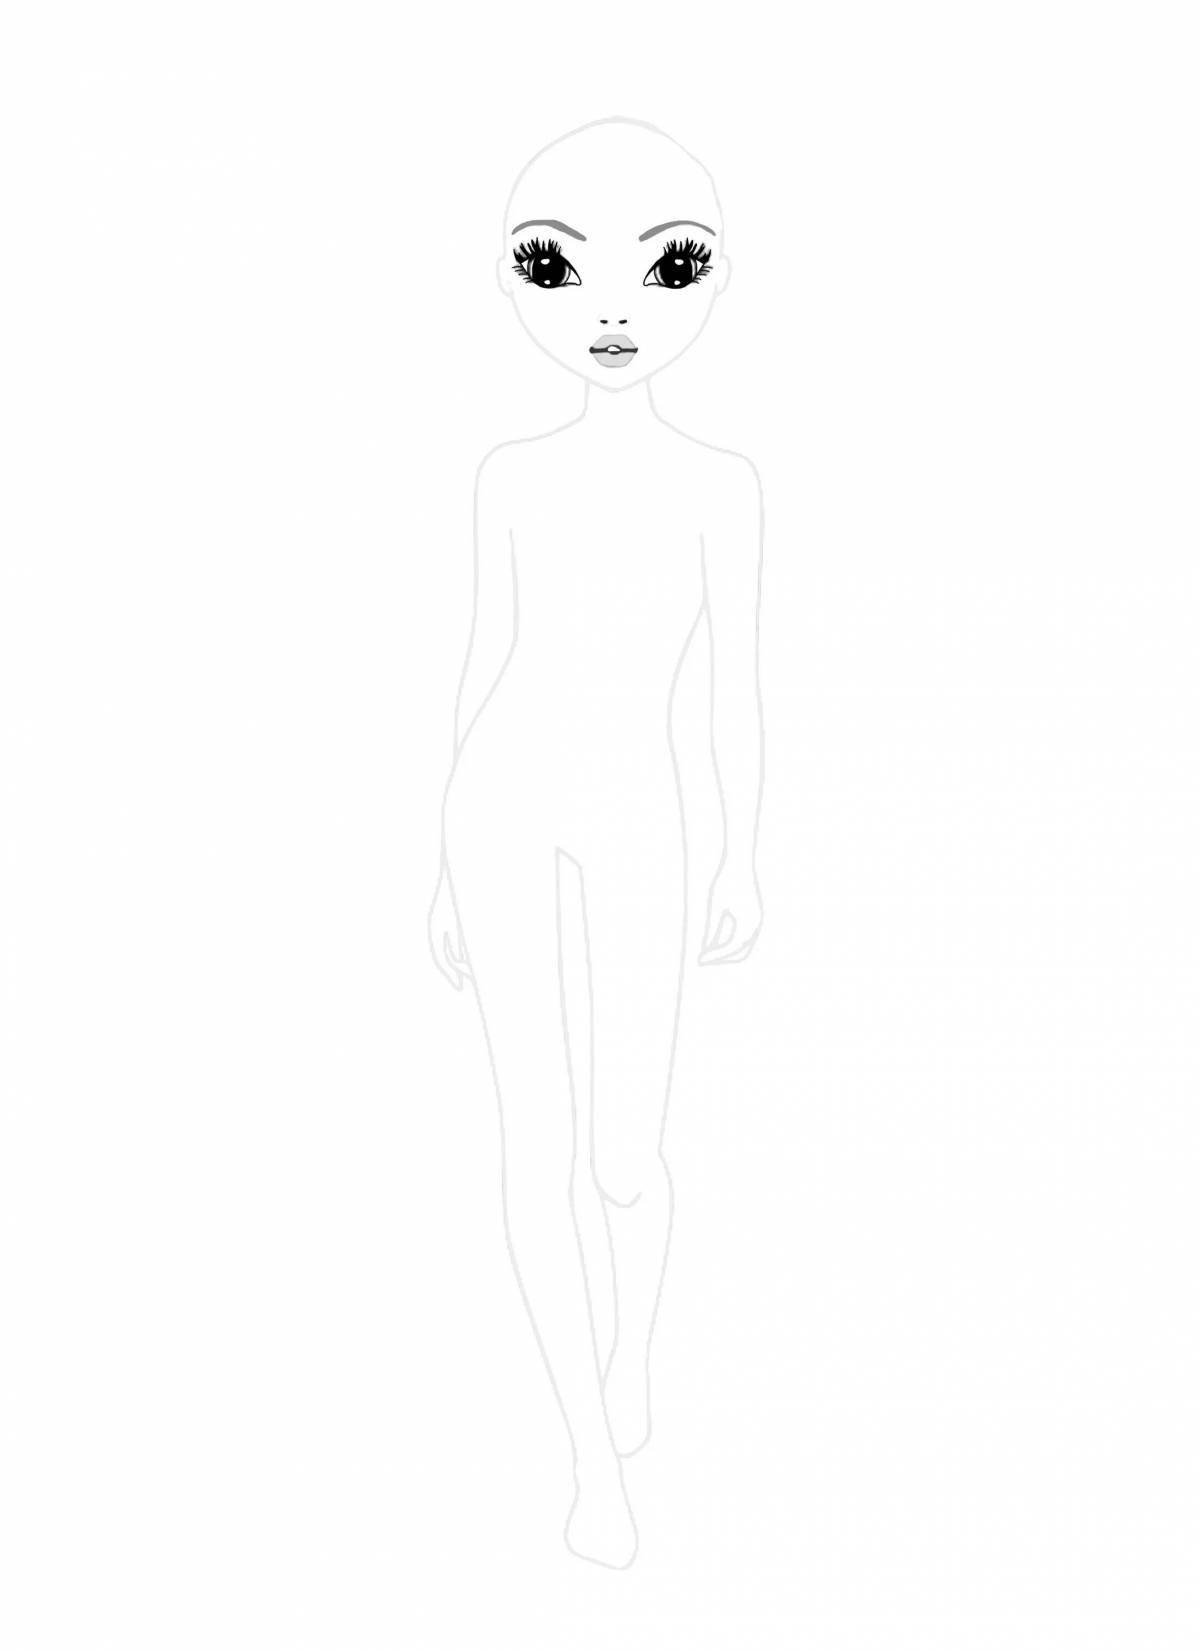 Coloring page adorable mannequin girl